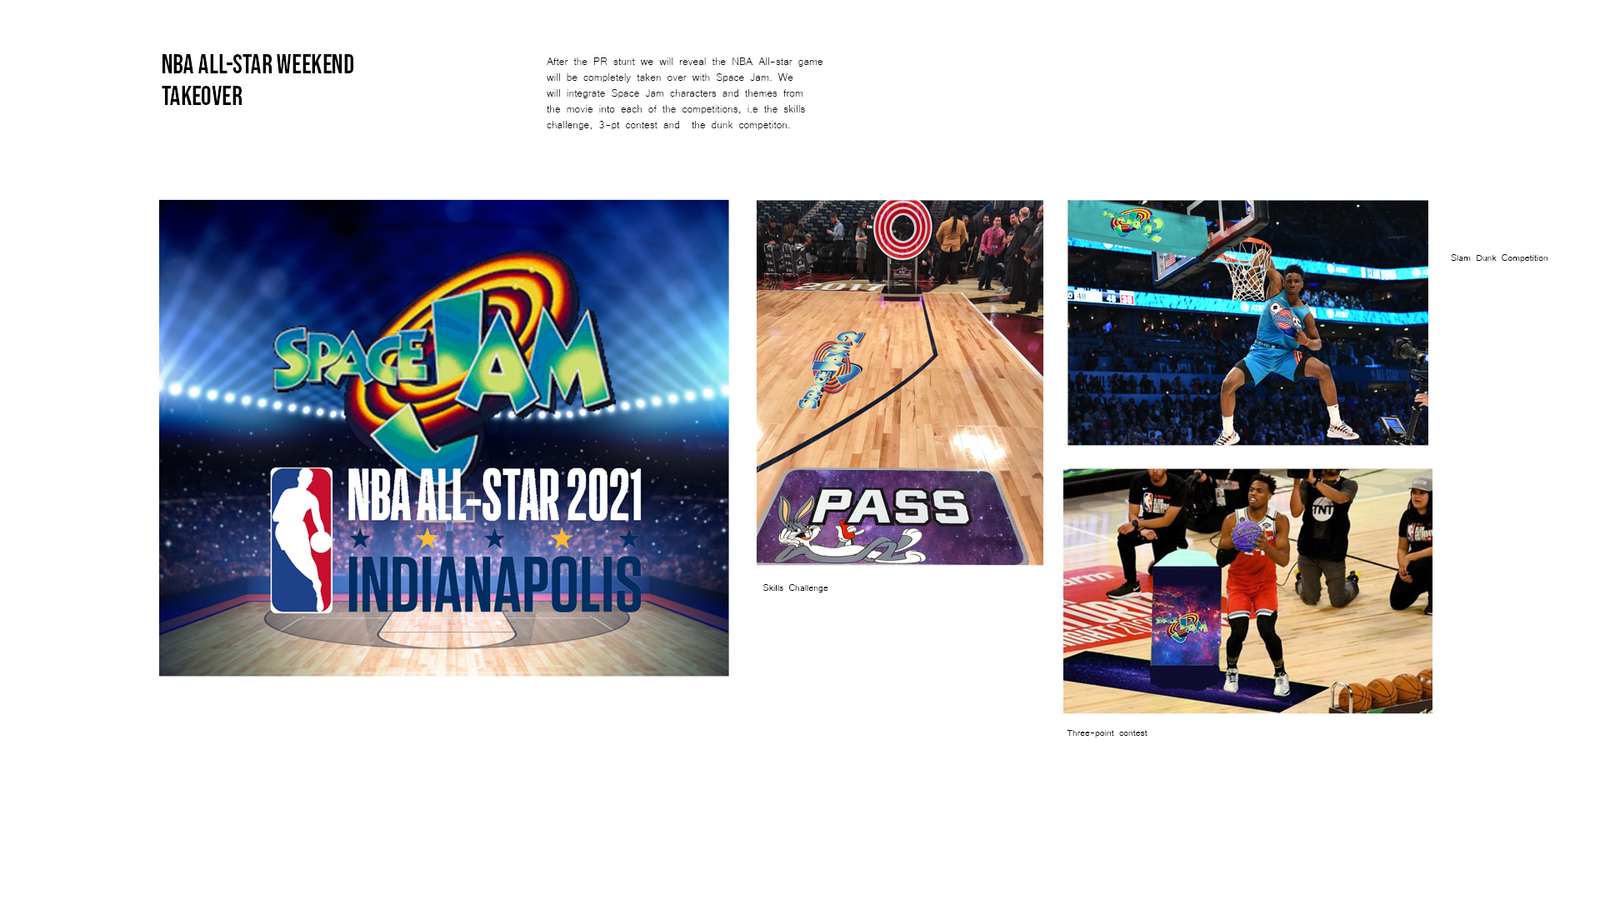 In 2021, the NBA All-Star game will take place in Indiana. This time it will be Space Jam themed. S